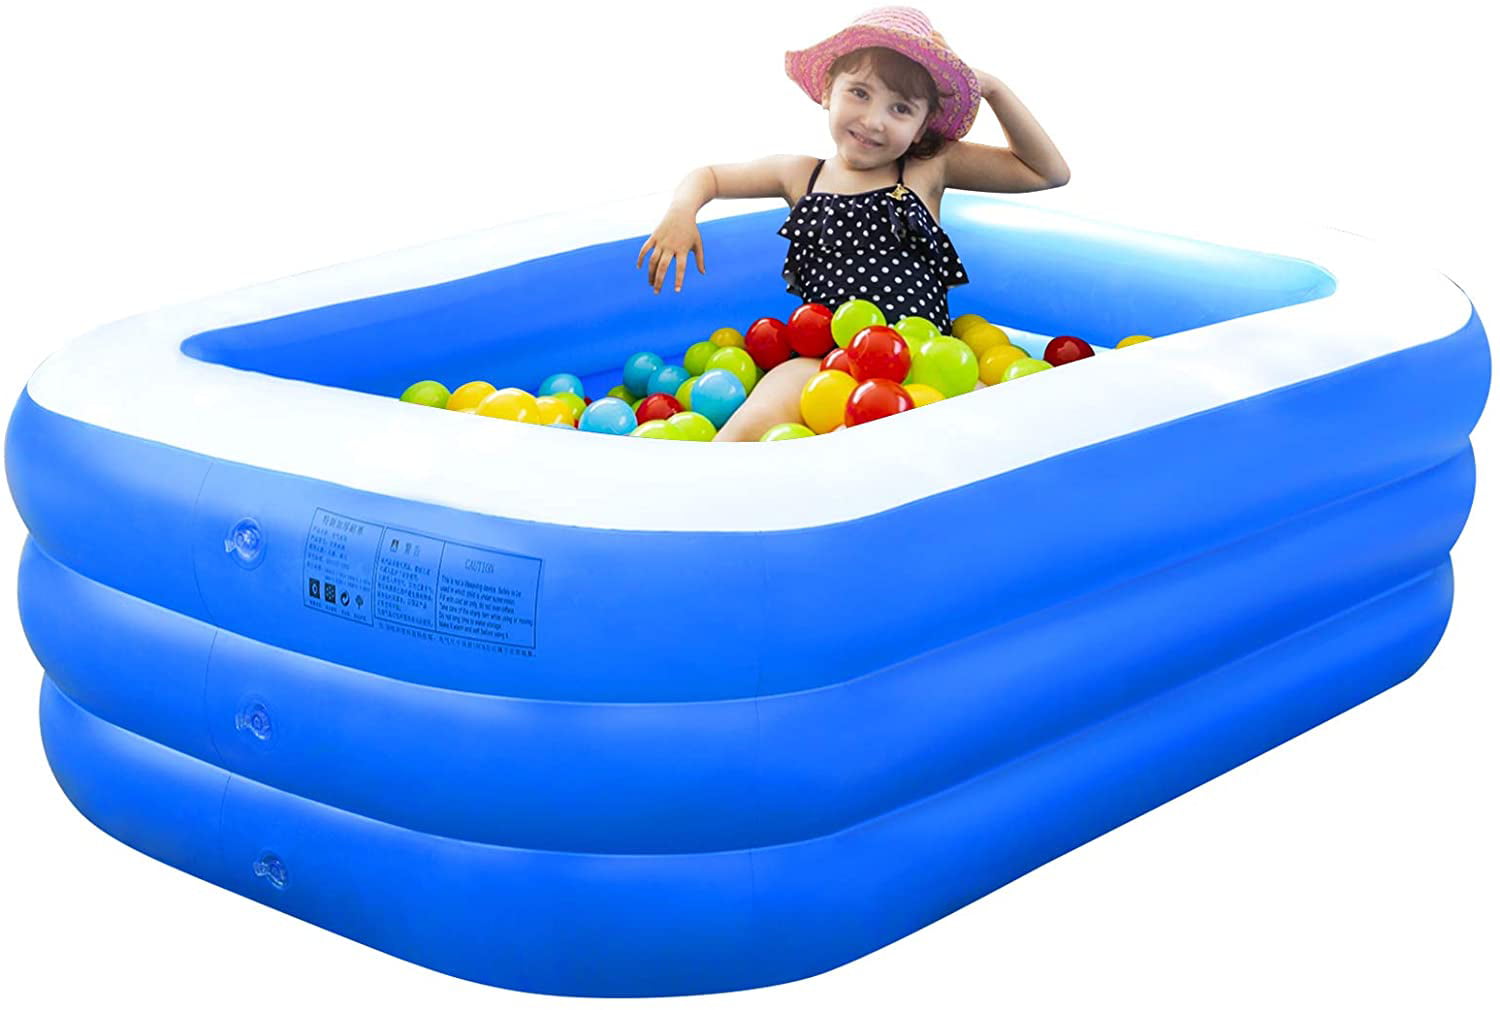 Inflatable Swimming Pool,59 X 43 X 19.5 Small Size Kiddie Pool Family Swimming Pool for kids,Inflatable Pool for Backyard Lounge Summer Swim Center Outdoor Garden 